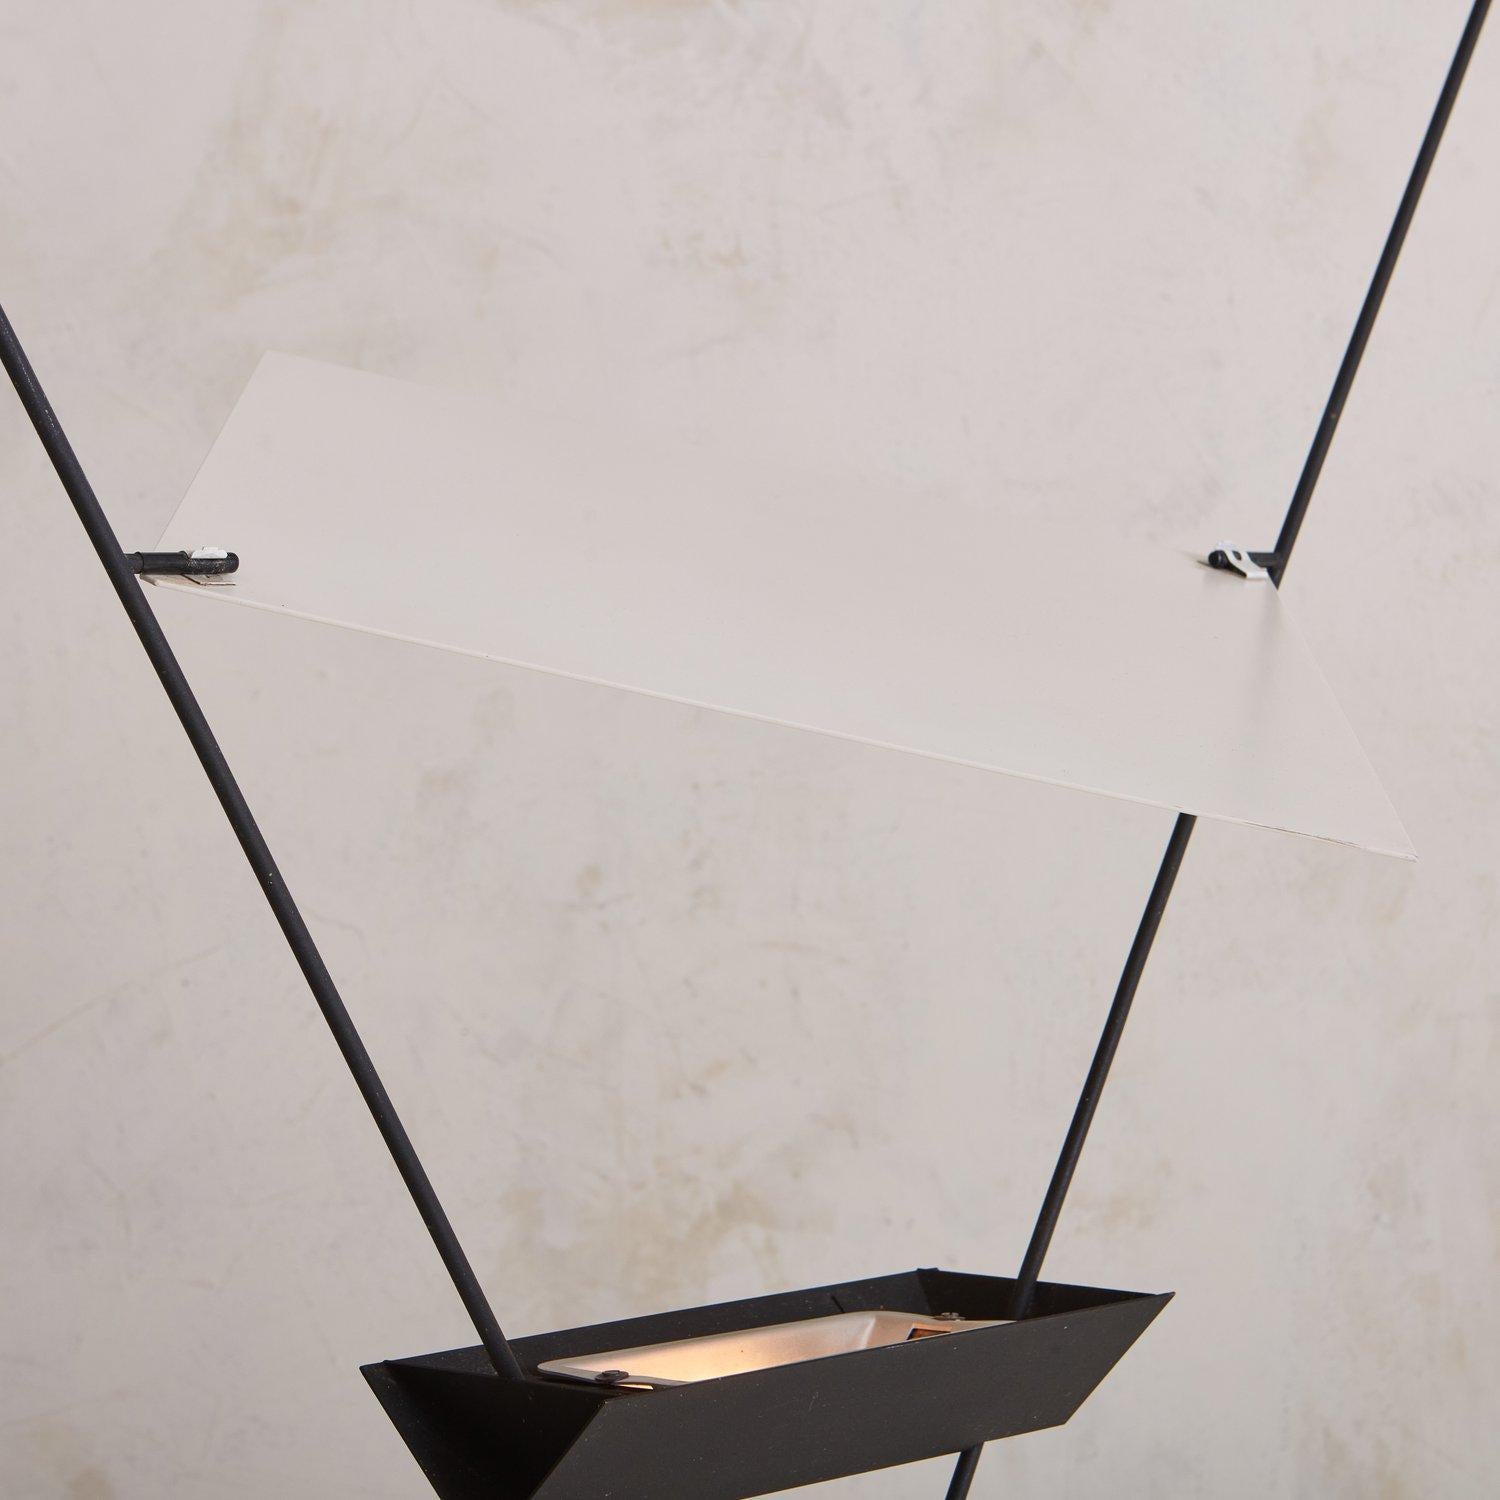 Late 20th Century Triangular Suspension Pendant by Mario Botta for Artemide, Italy 1980s For Sale